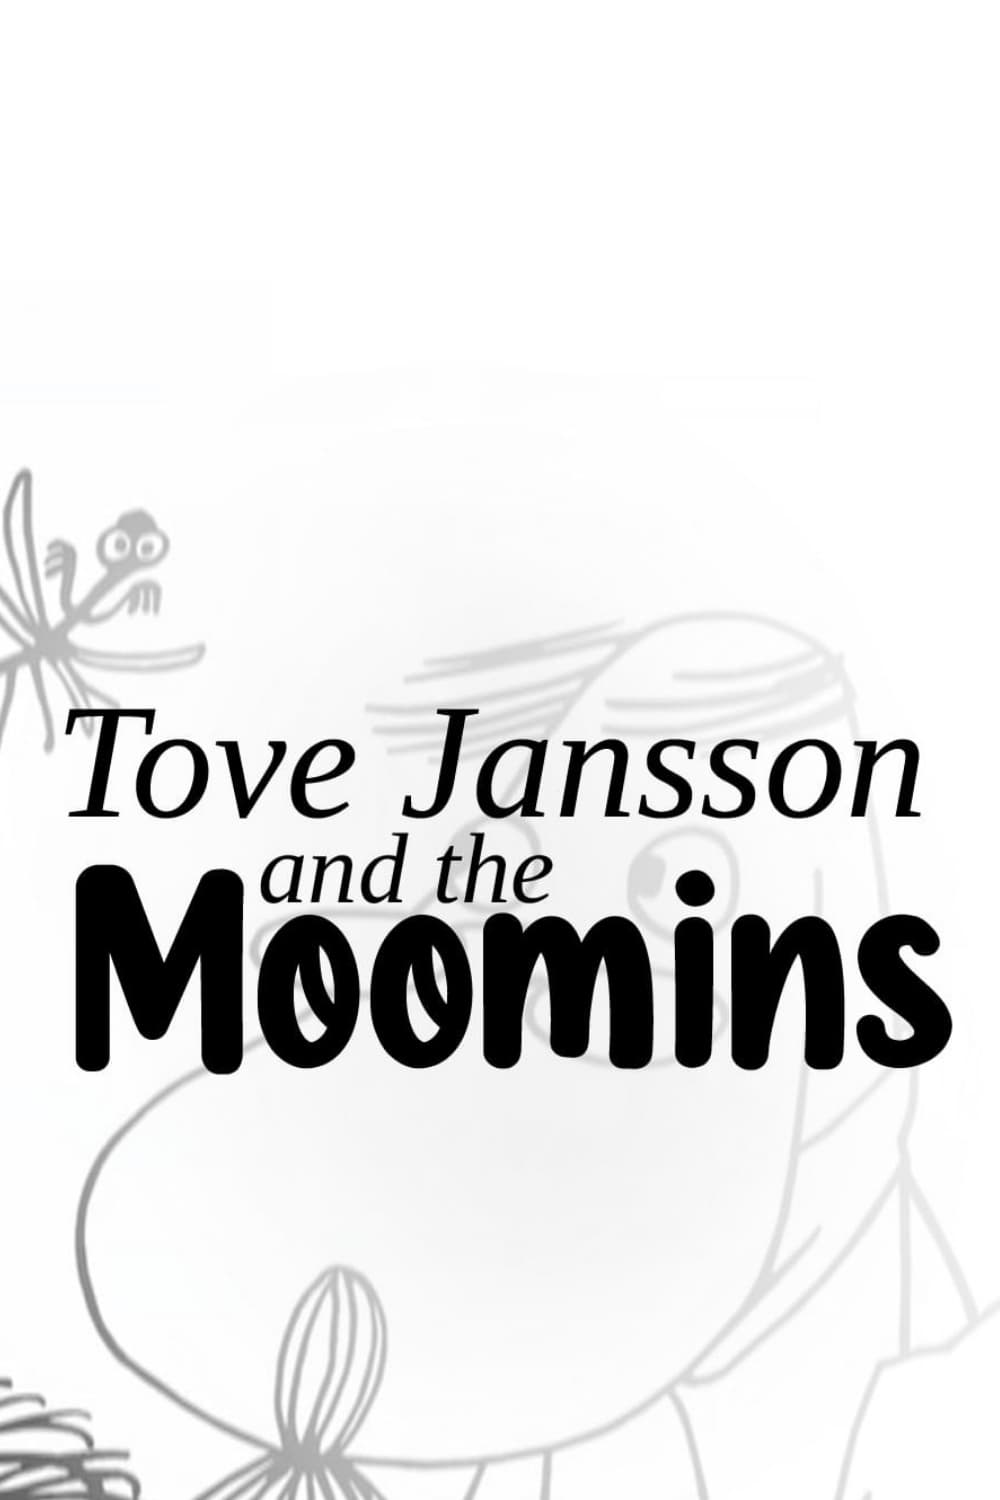 Tove Jansson and the Moomins